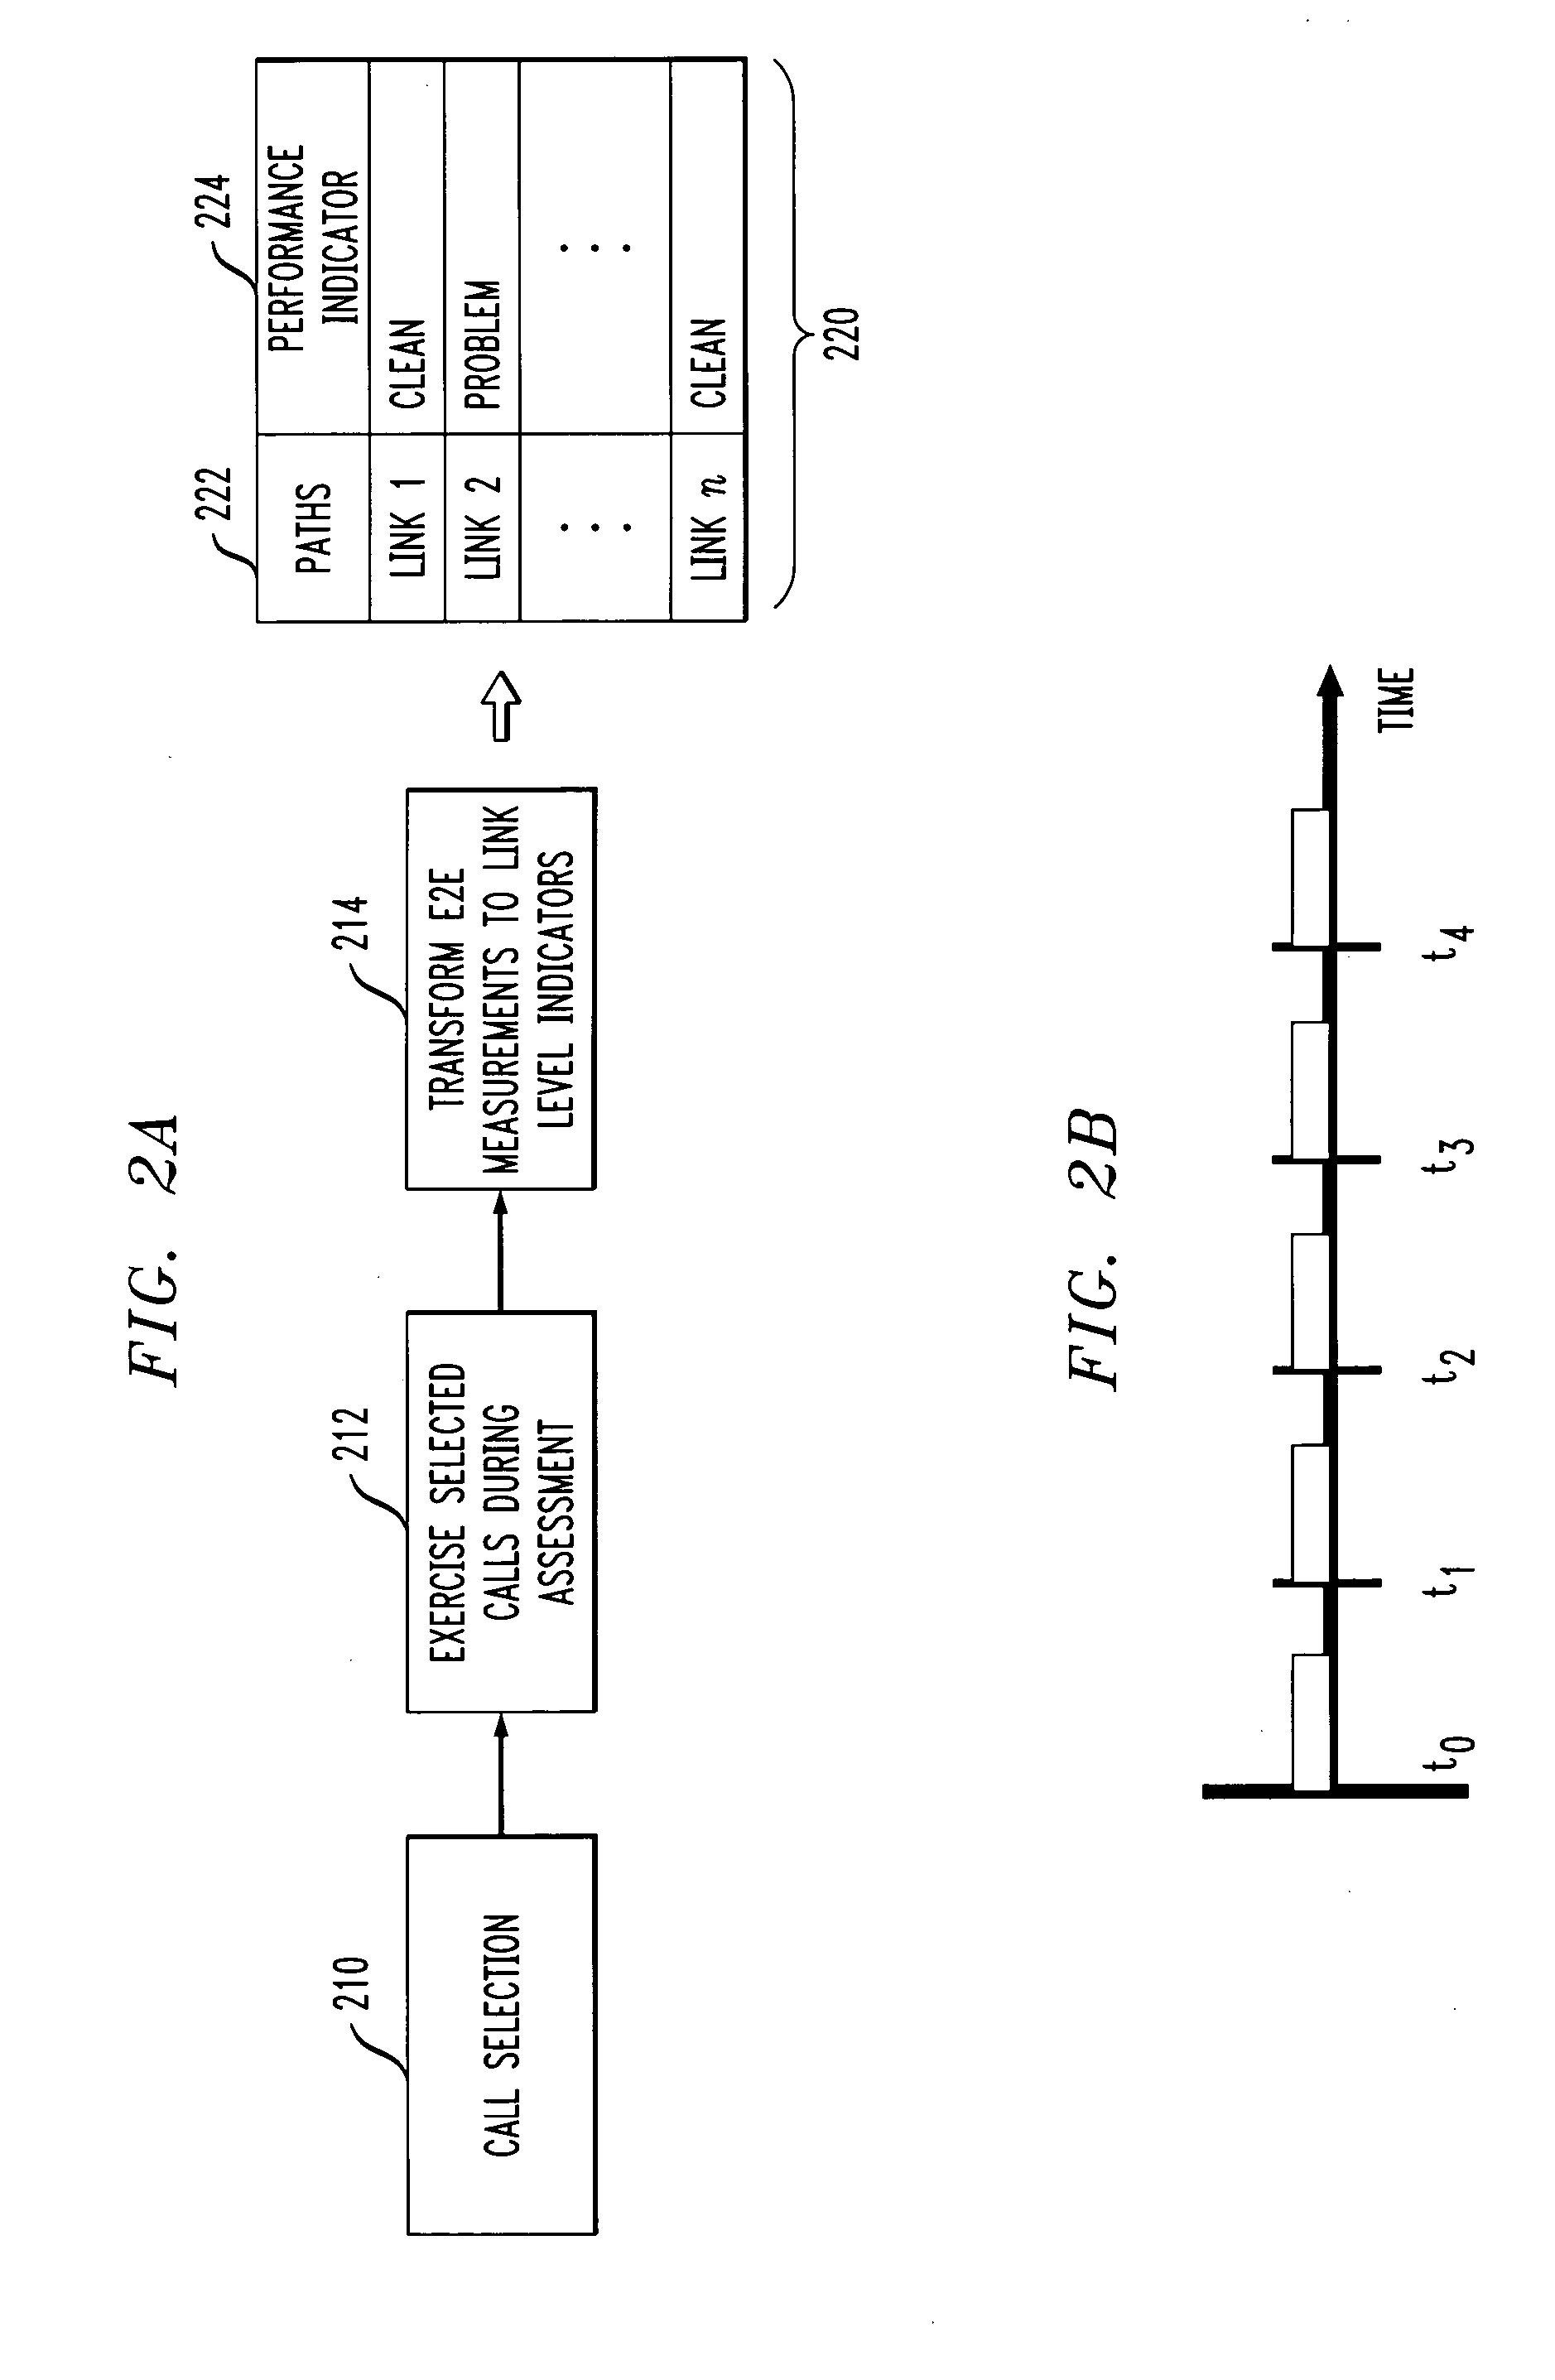 Method and apparatus for automatic determination of performance problem locations in a network